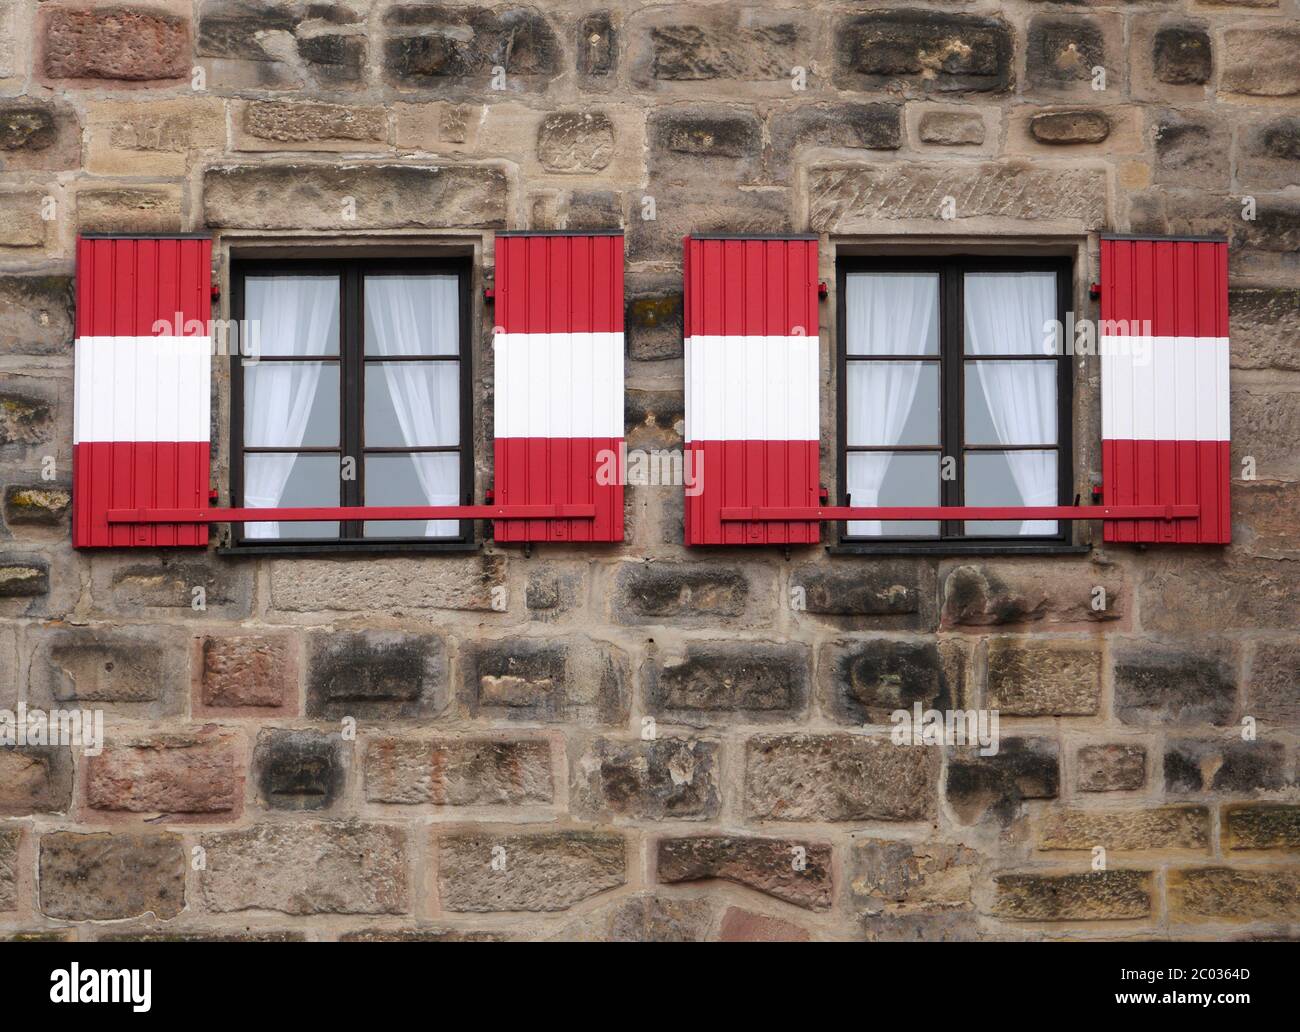 Windows With Shutters 2C0364D 